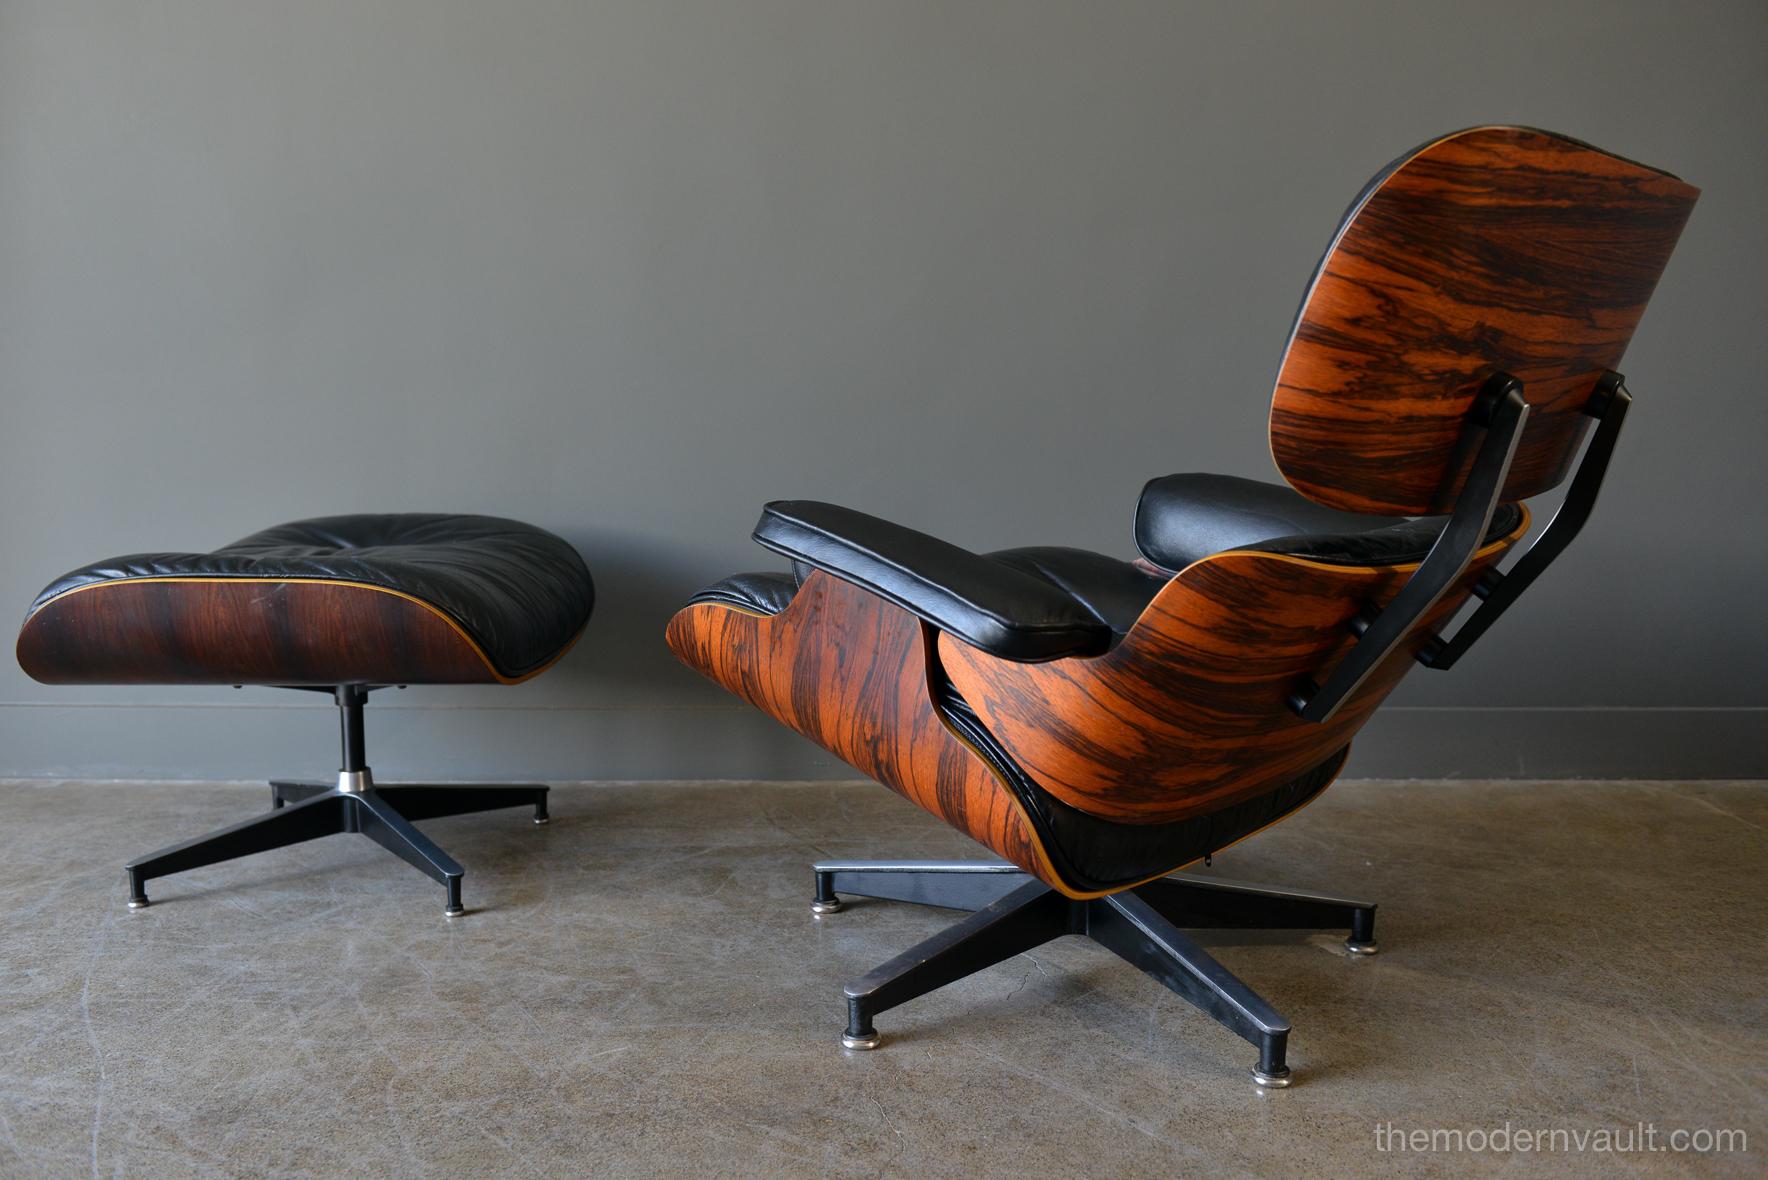 Eames rosewood lounge chair and ottoman, circa 1971. Original 3rd generation (early to mid-1970s) Charles Eames 670 and 671 lounge chair and ottoman for Herman Miller in black leather and rosewood. Beautiful soft patina to the leather, original 5